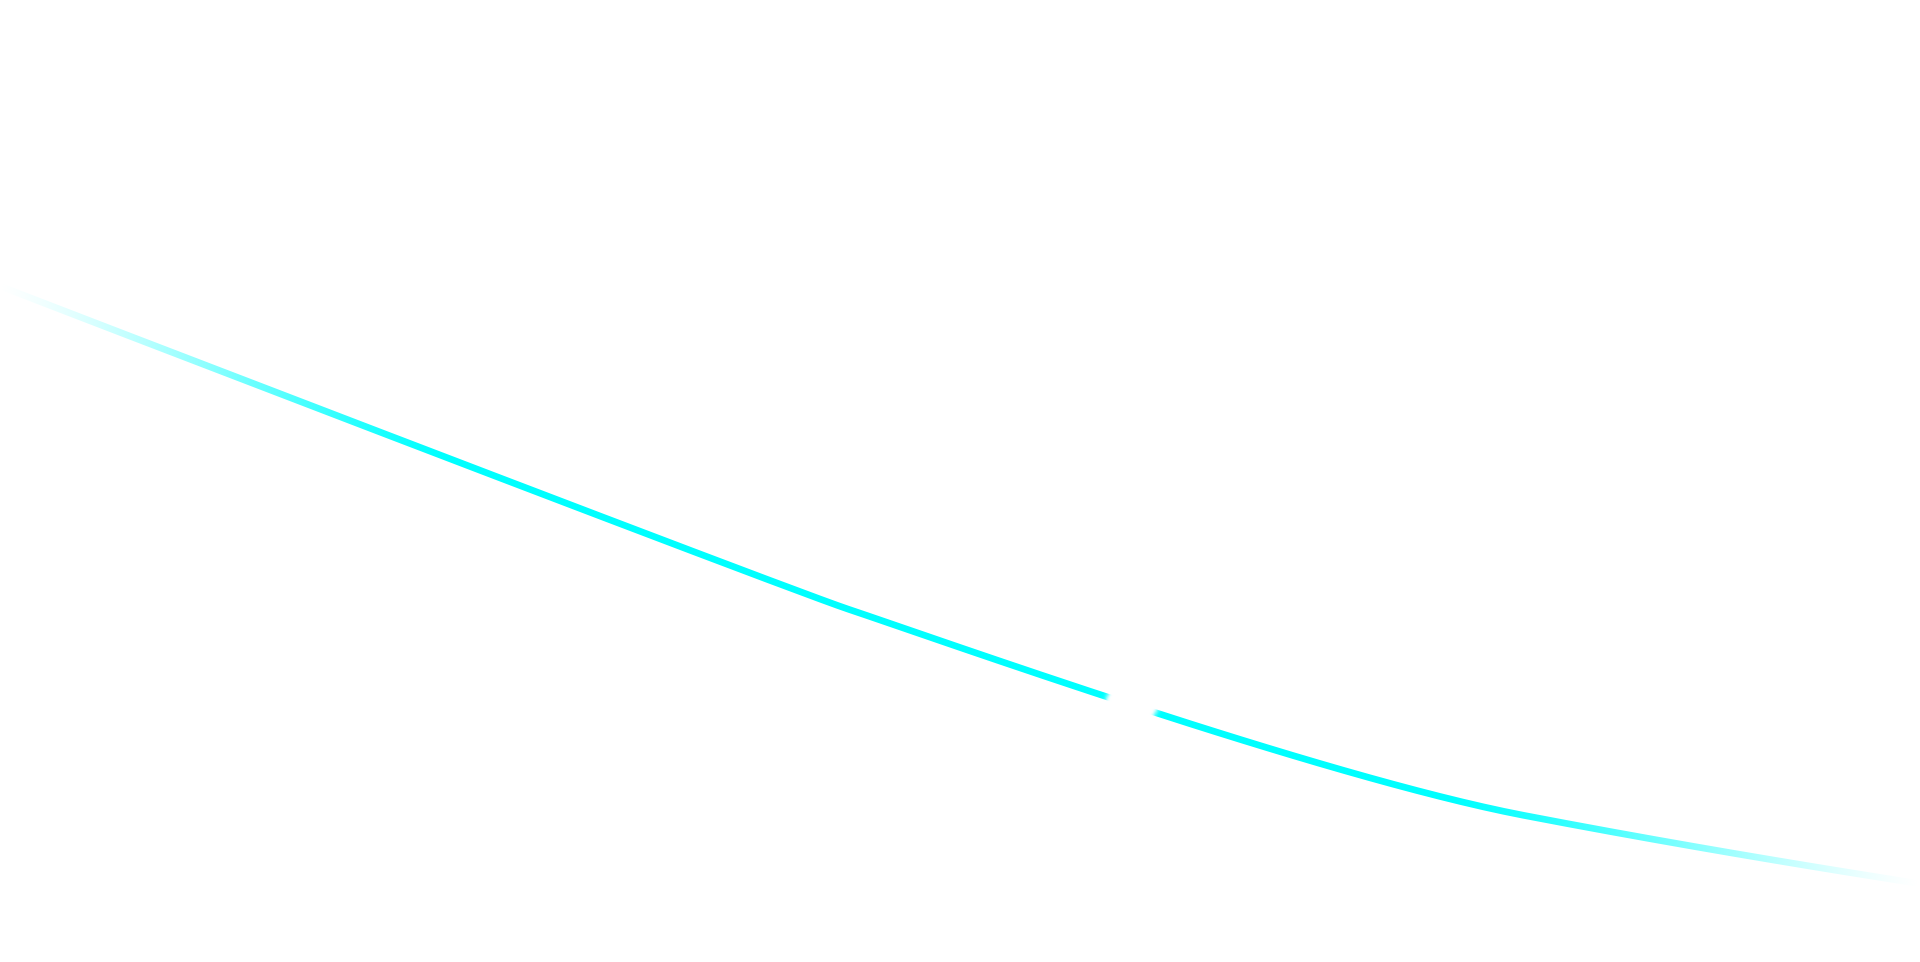 electric blue line along the vehicle path that abstractly indicating the GPS direction